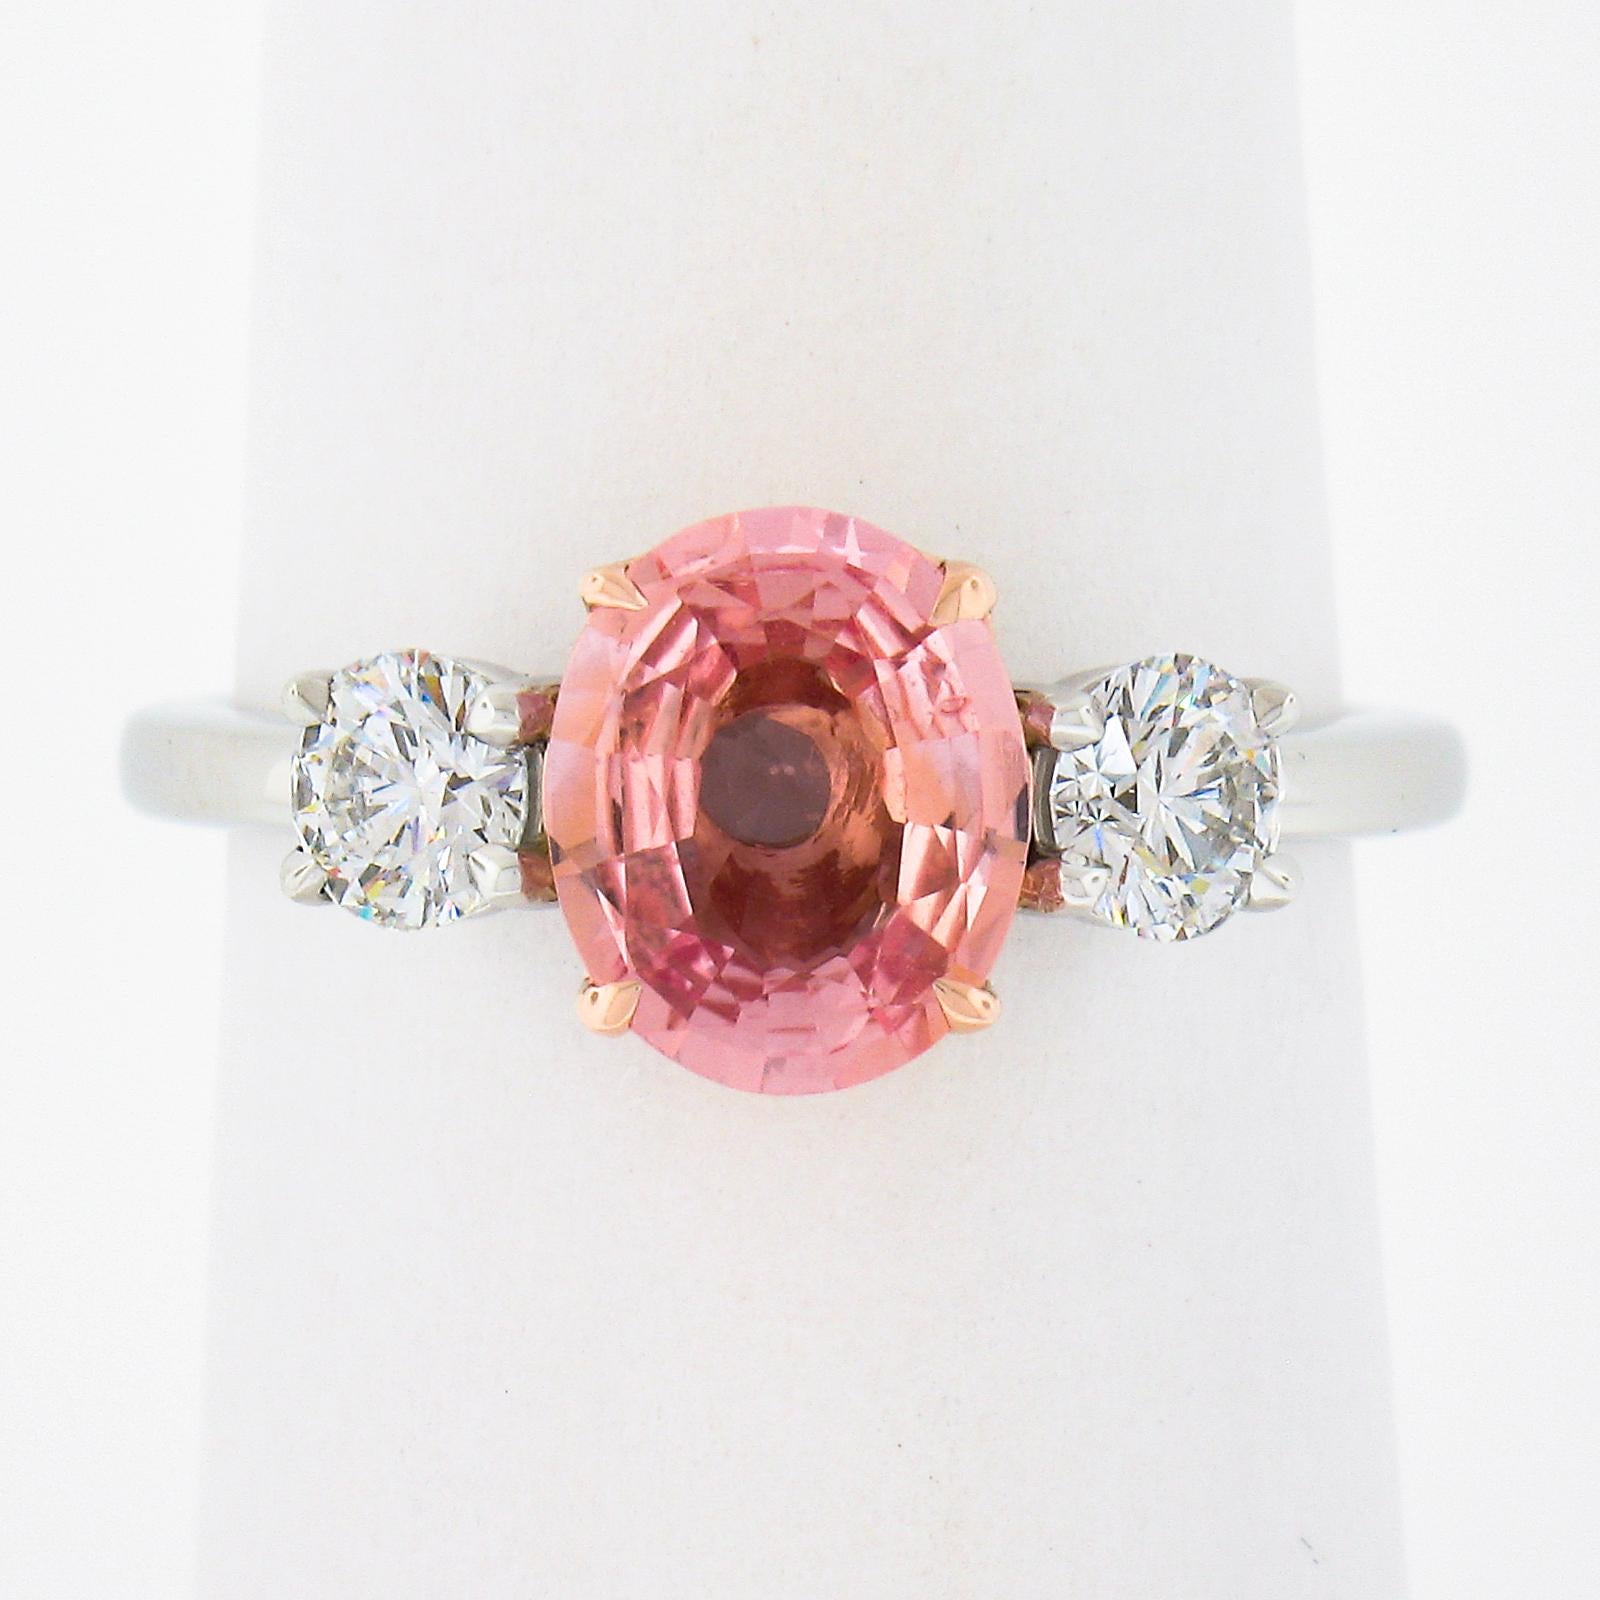 This custom and newly crafted three stone engagement ring features a gorgeous and absolutely fiery Padparadscha sapphire that is neatly prong set in the center rose gold basket which helps enhances its unusual and soothing pink-orange color. It is